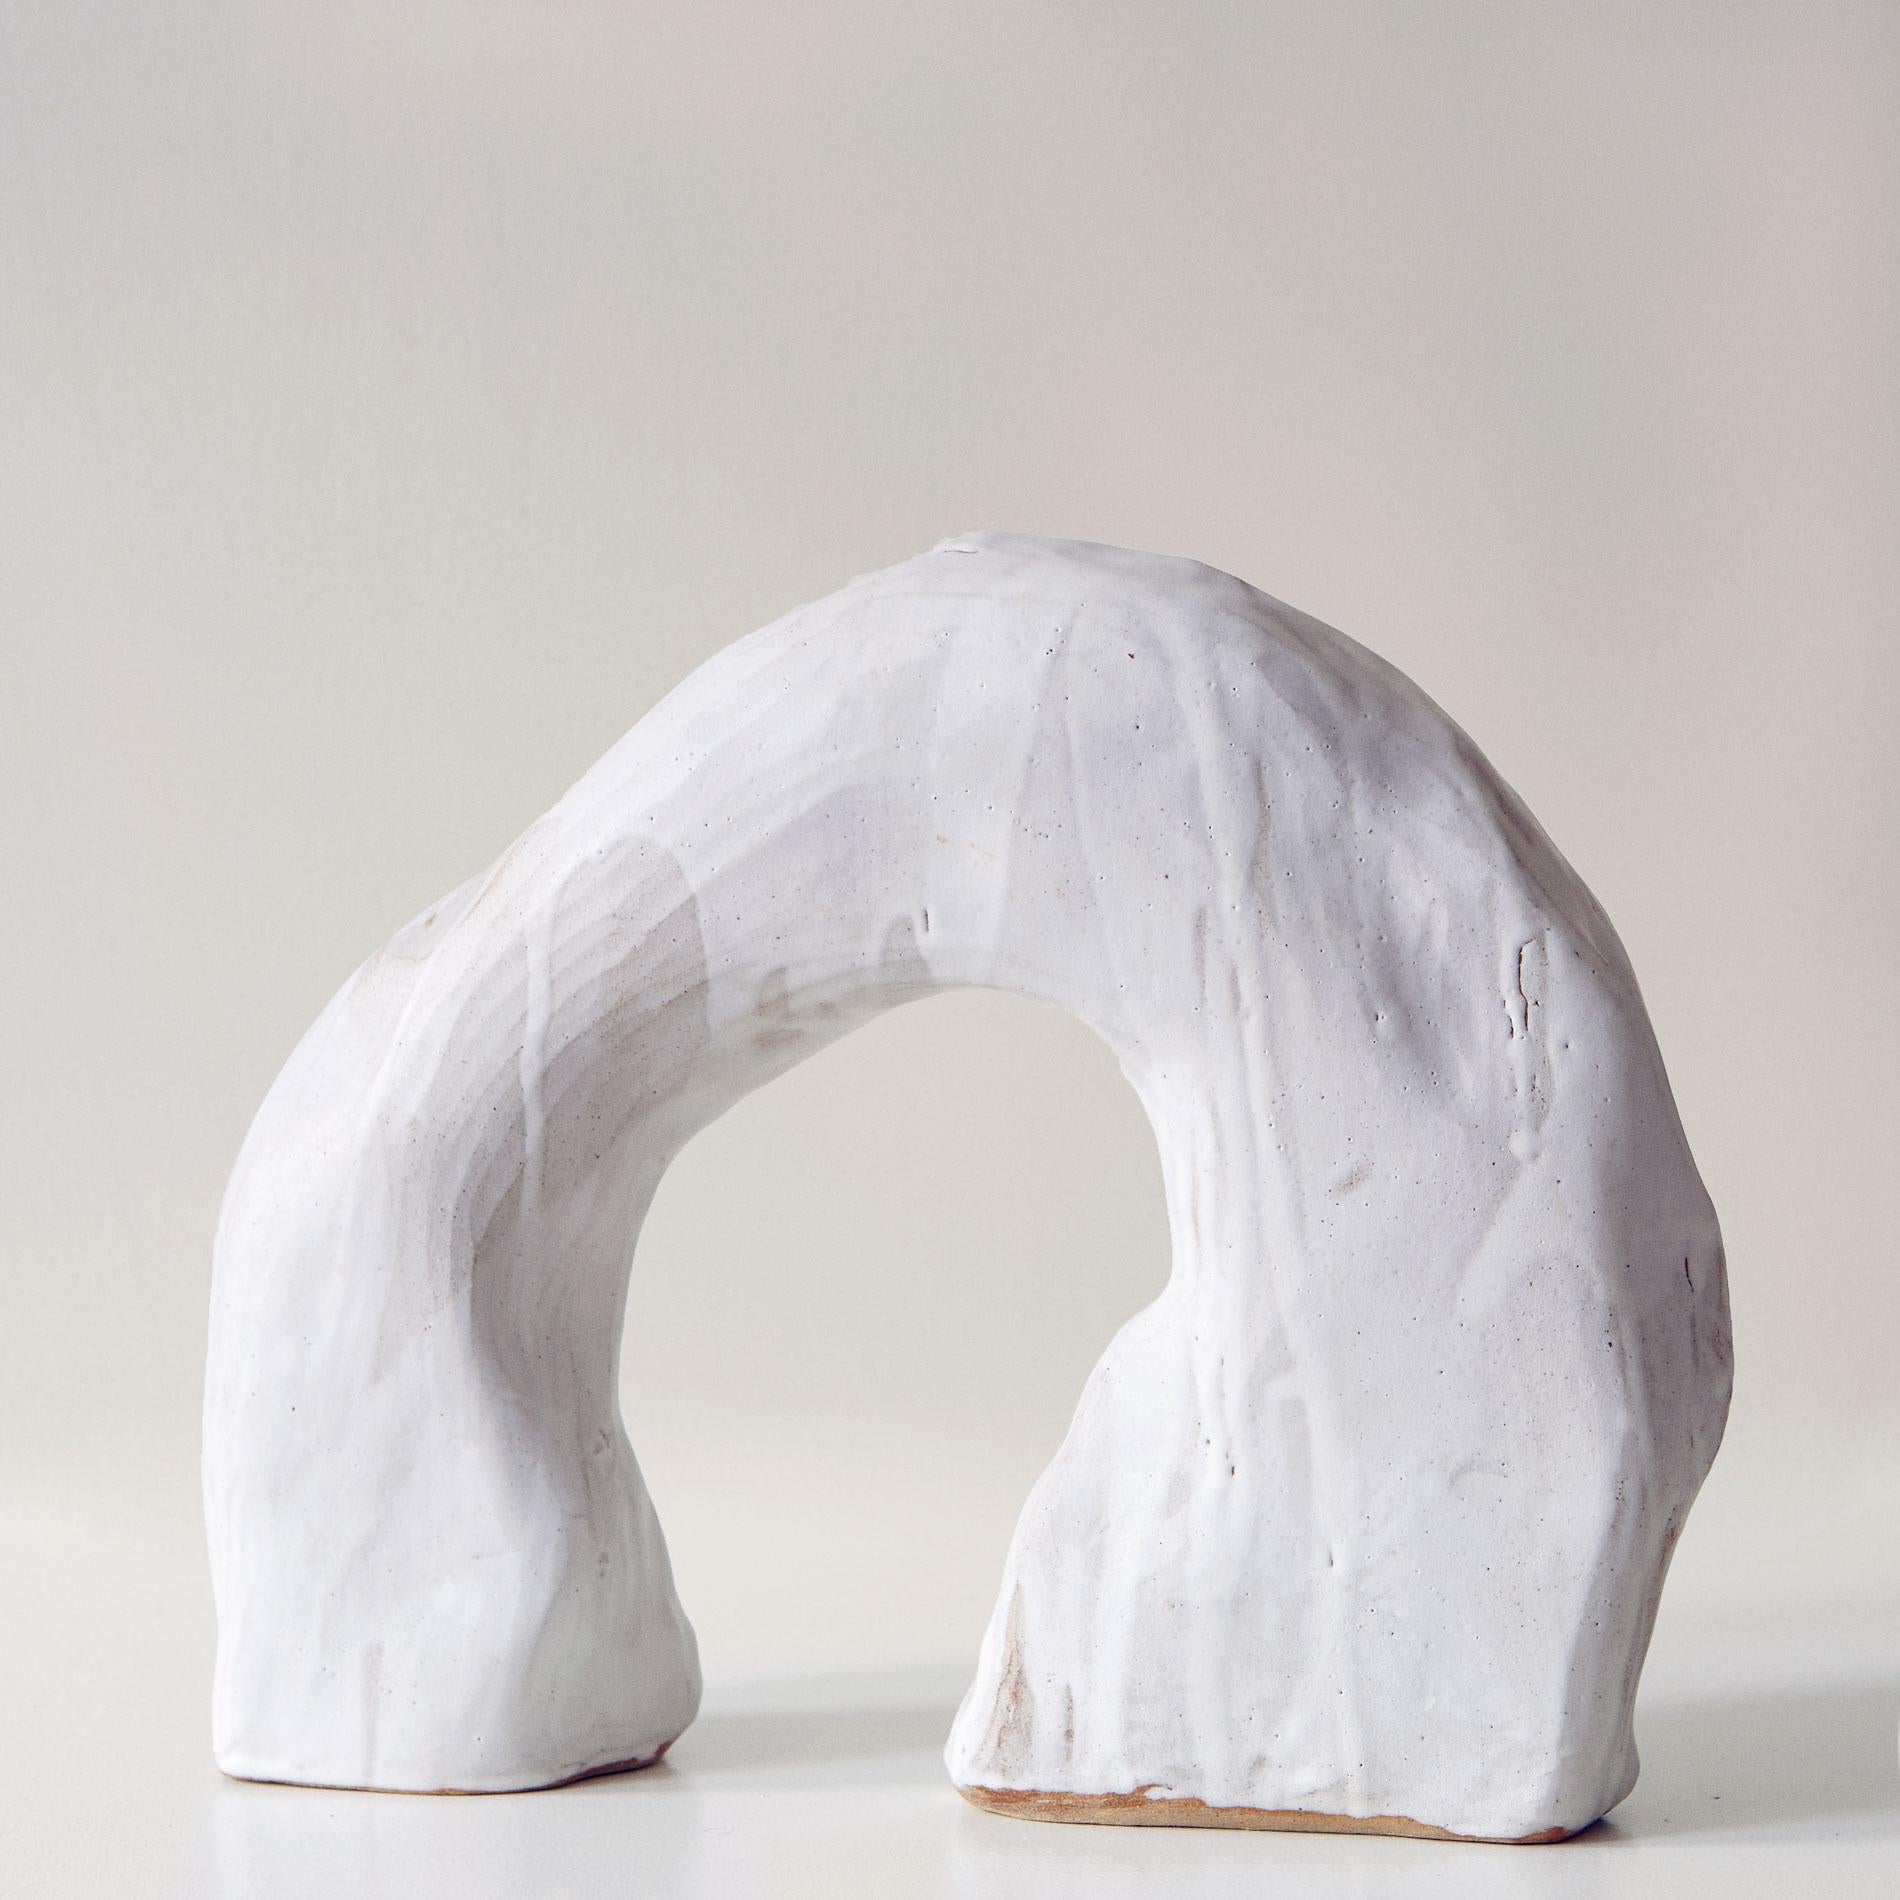 Original ceramic sculpture by Noe Kuremoto.

Noe’s ceramics explore Japanese mythology and folklore, drawing inspiration from the spirits of the natural world.

Her Yama series of sculptural forms are derived from the Japanese term for ‘mountain’,